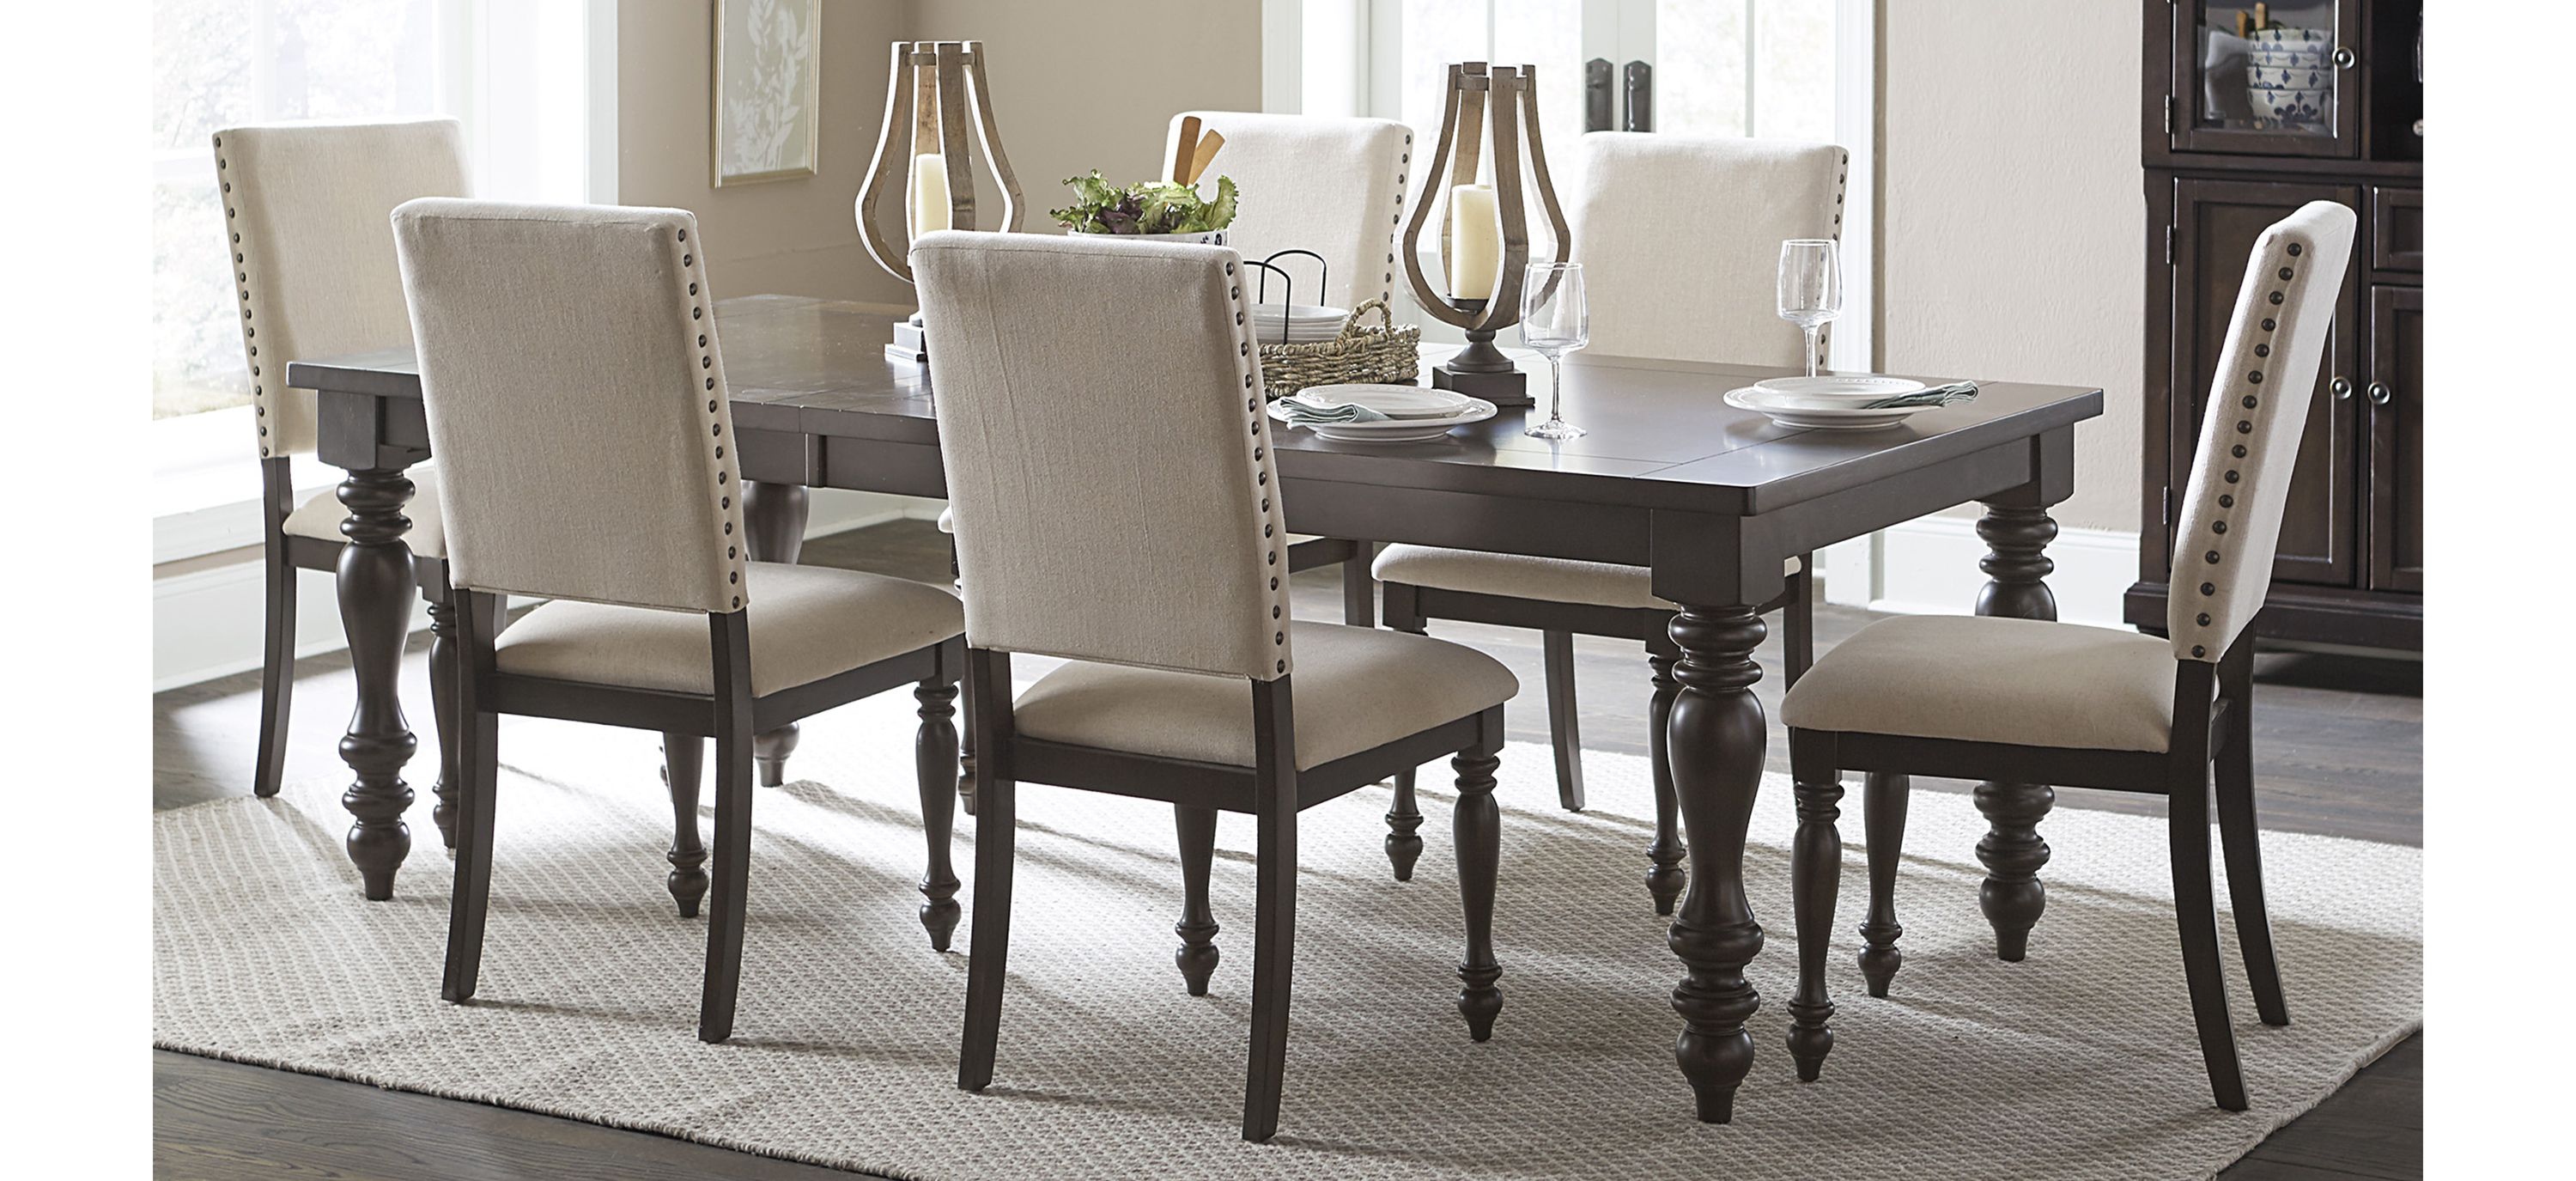 Shelley 7-pc. Dining Set